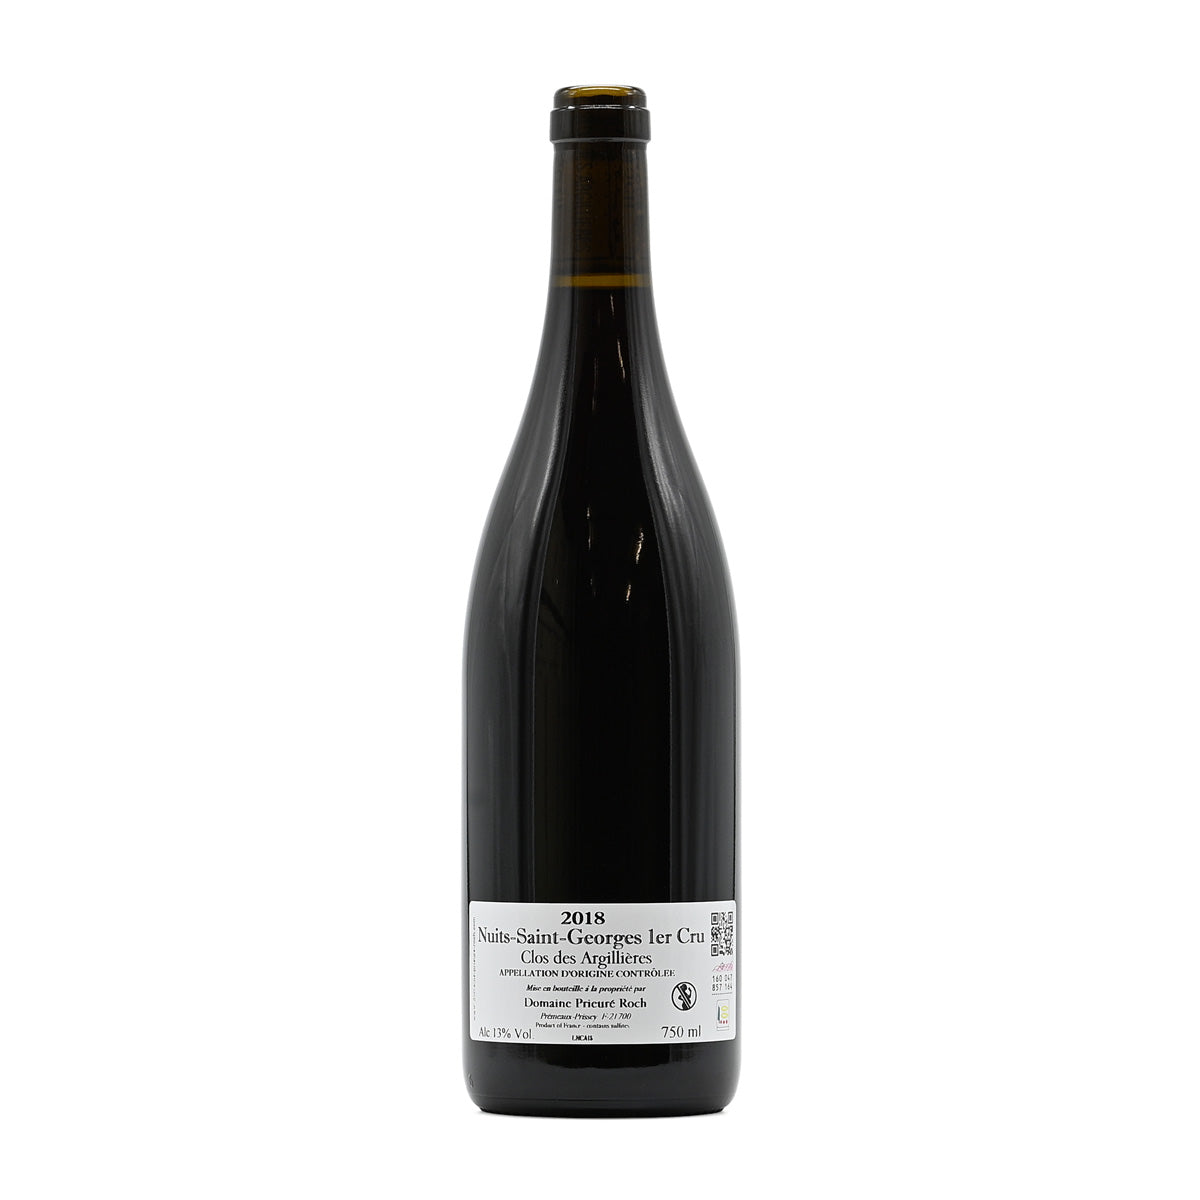 Domaine Prieure Roch Nuits St-Georges 1er Cru Clos des Argillieres 2018, 750ml French red wine, made from Pinot Noir, from Nuits-Saint-George Premier Cru, Burgundy, France – GDV Fine Wines, Hong Kong